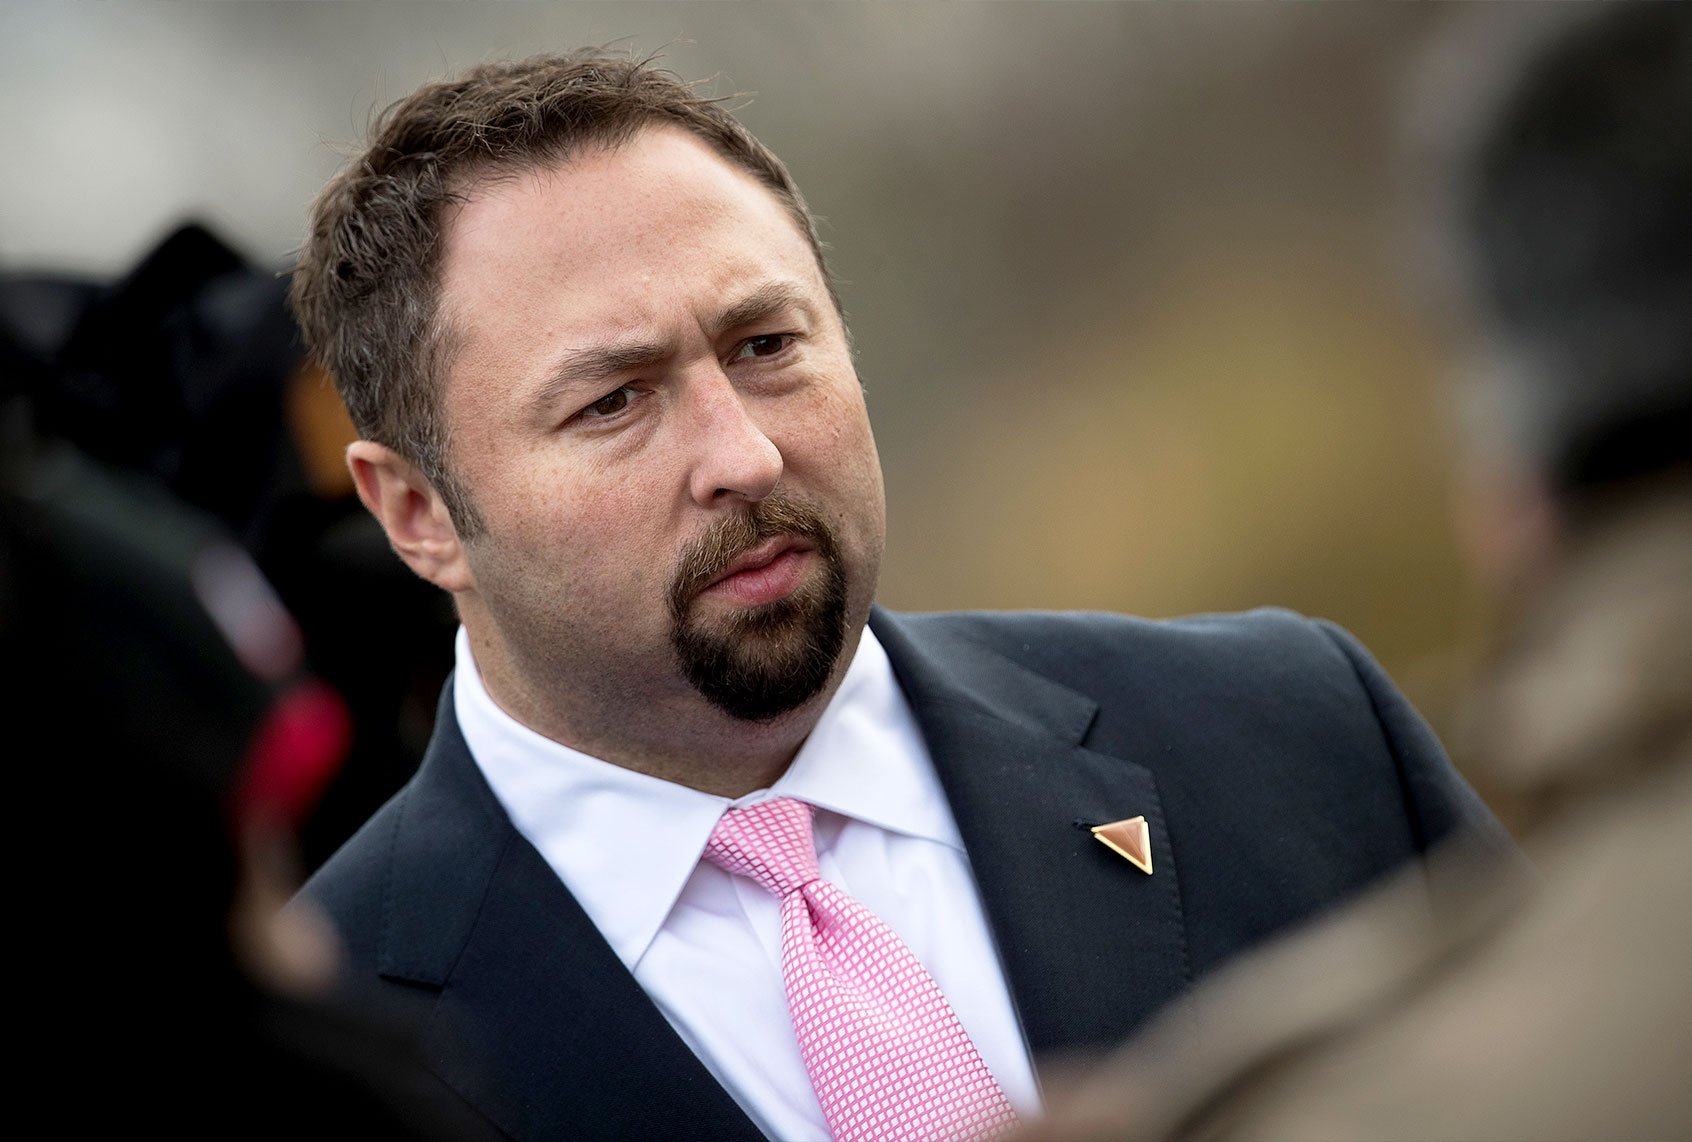 Trump adviser Jason Miller hid income and misled court to avoid paying child support: report